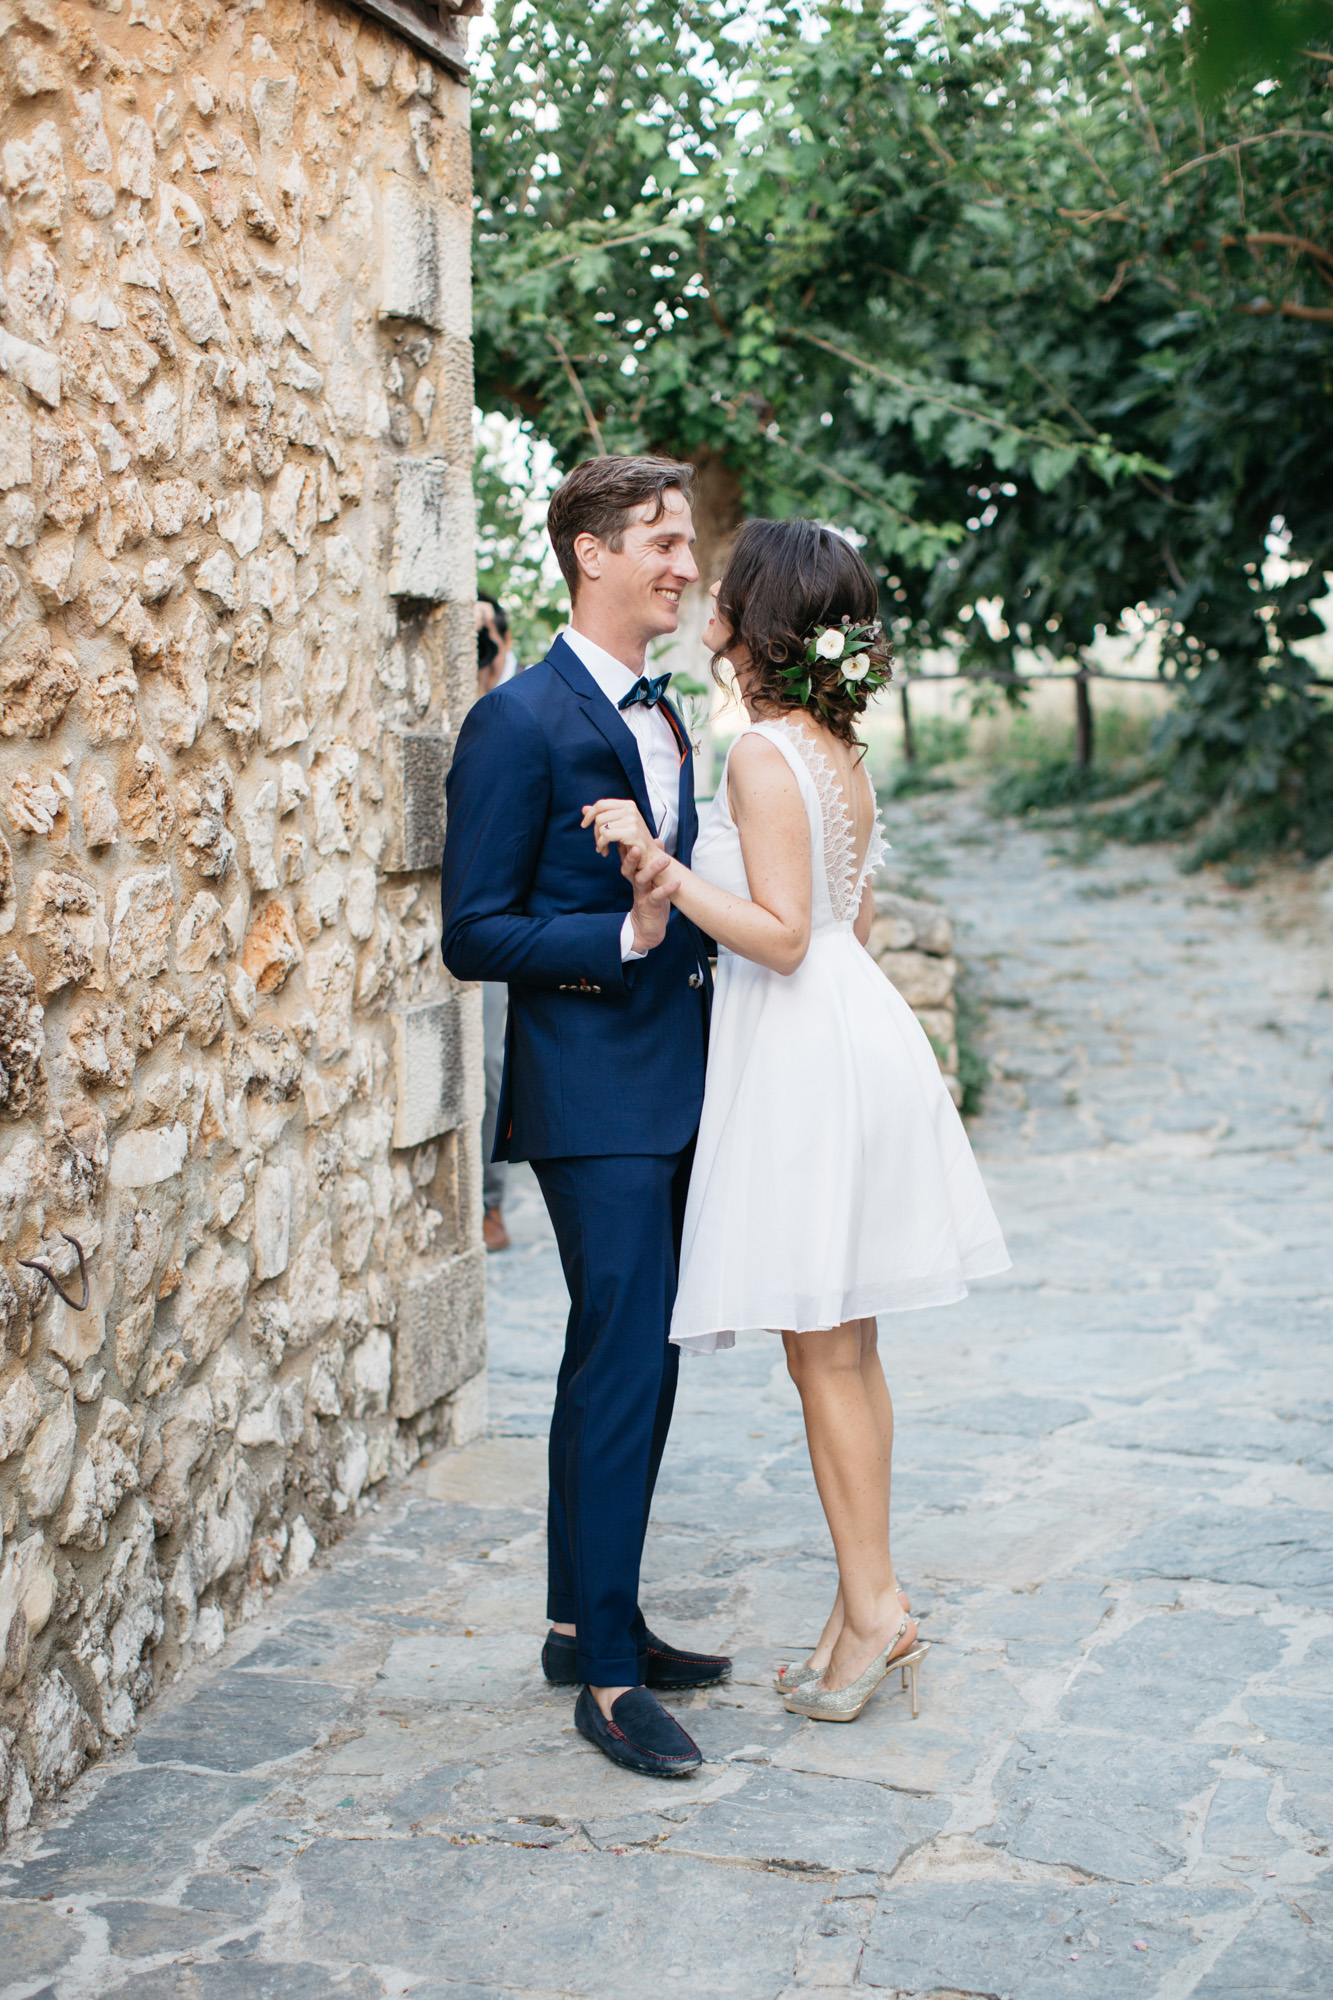 Sweet first look wedding moments at Grecotel Agreco Farm Crete Greece.